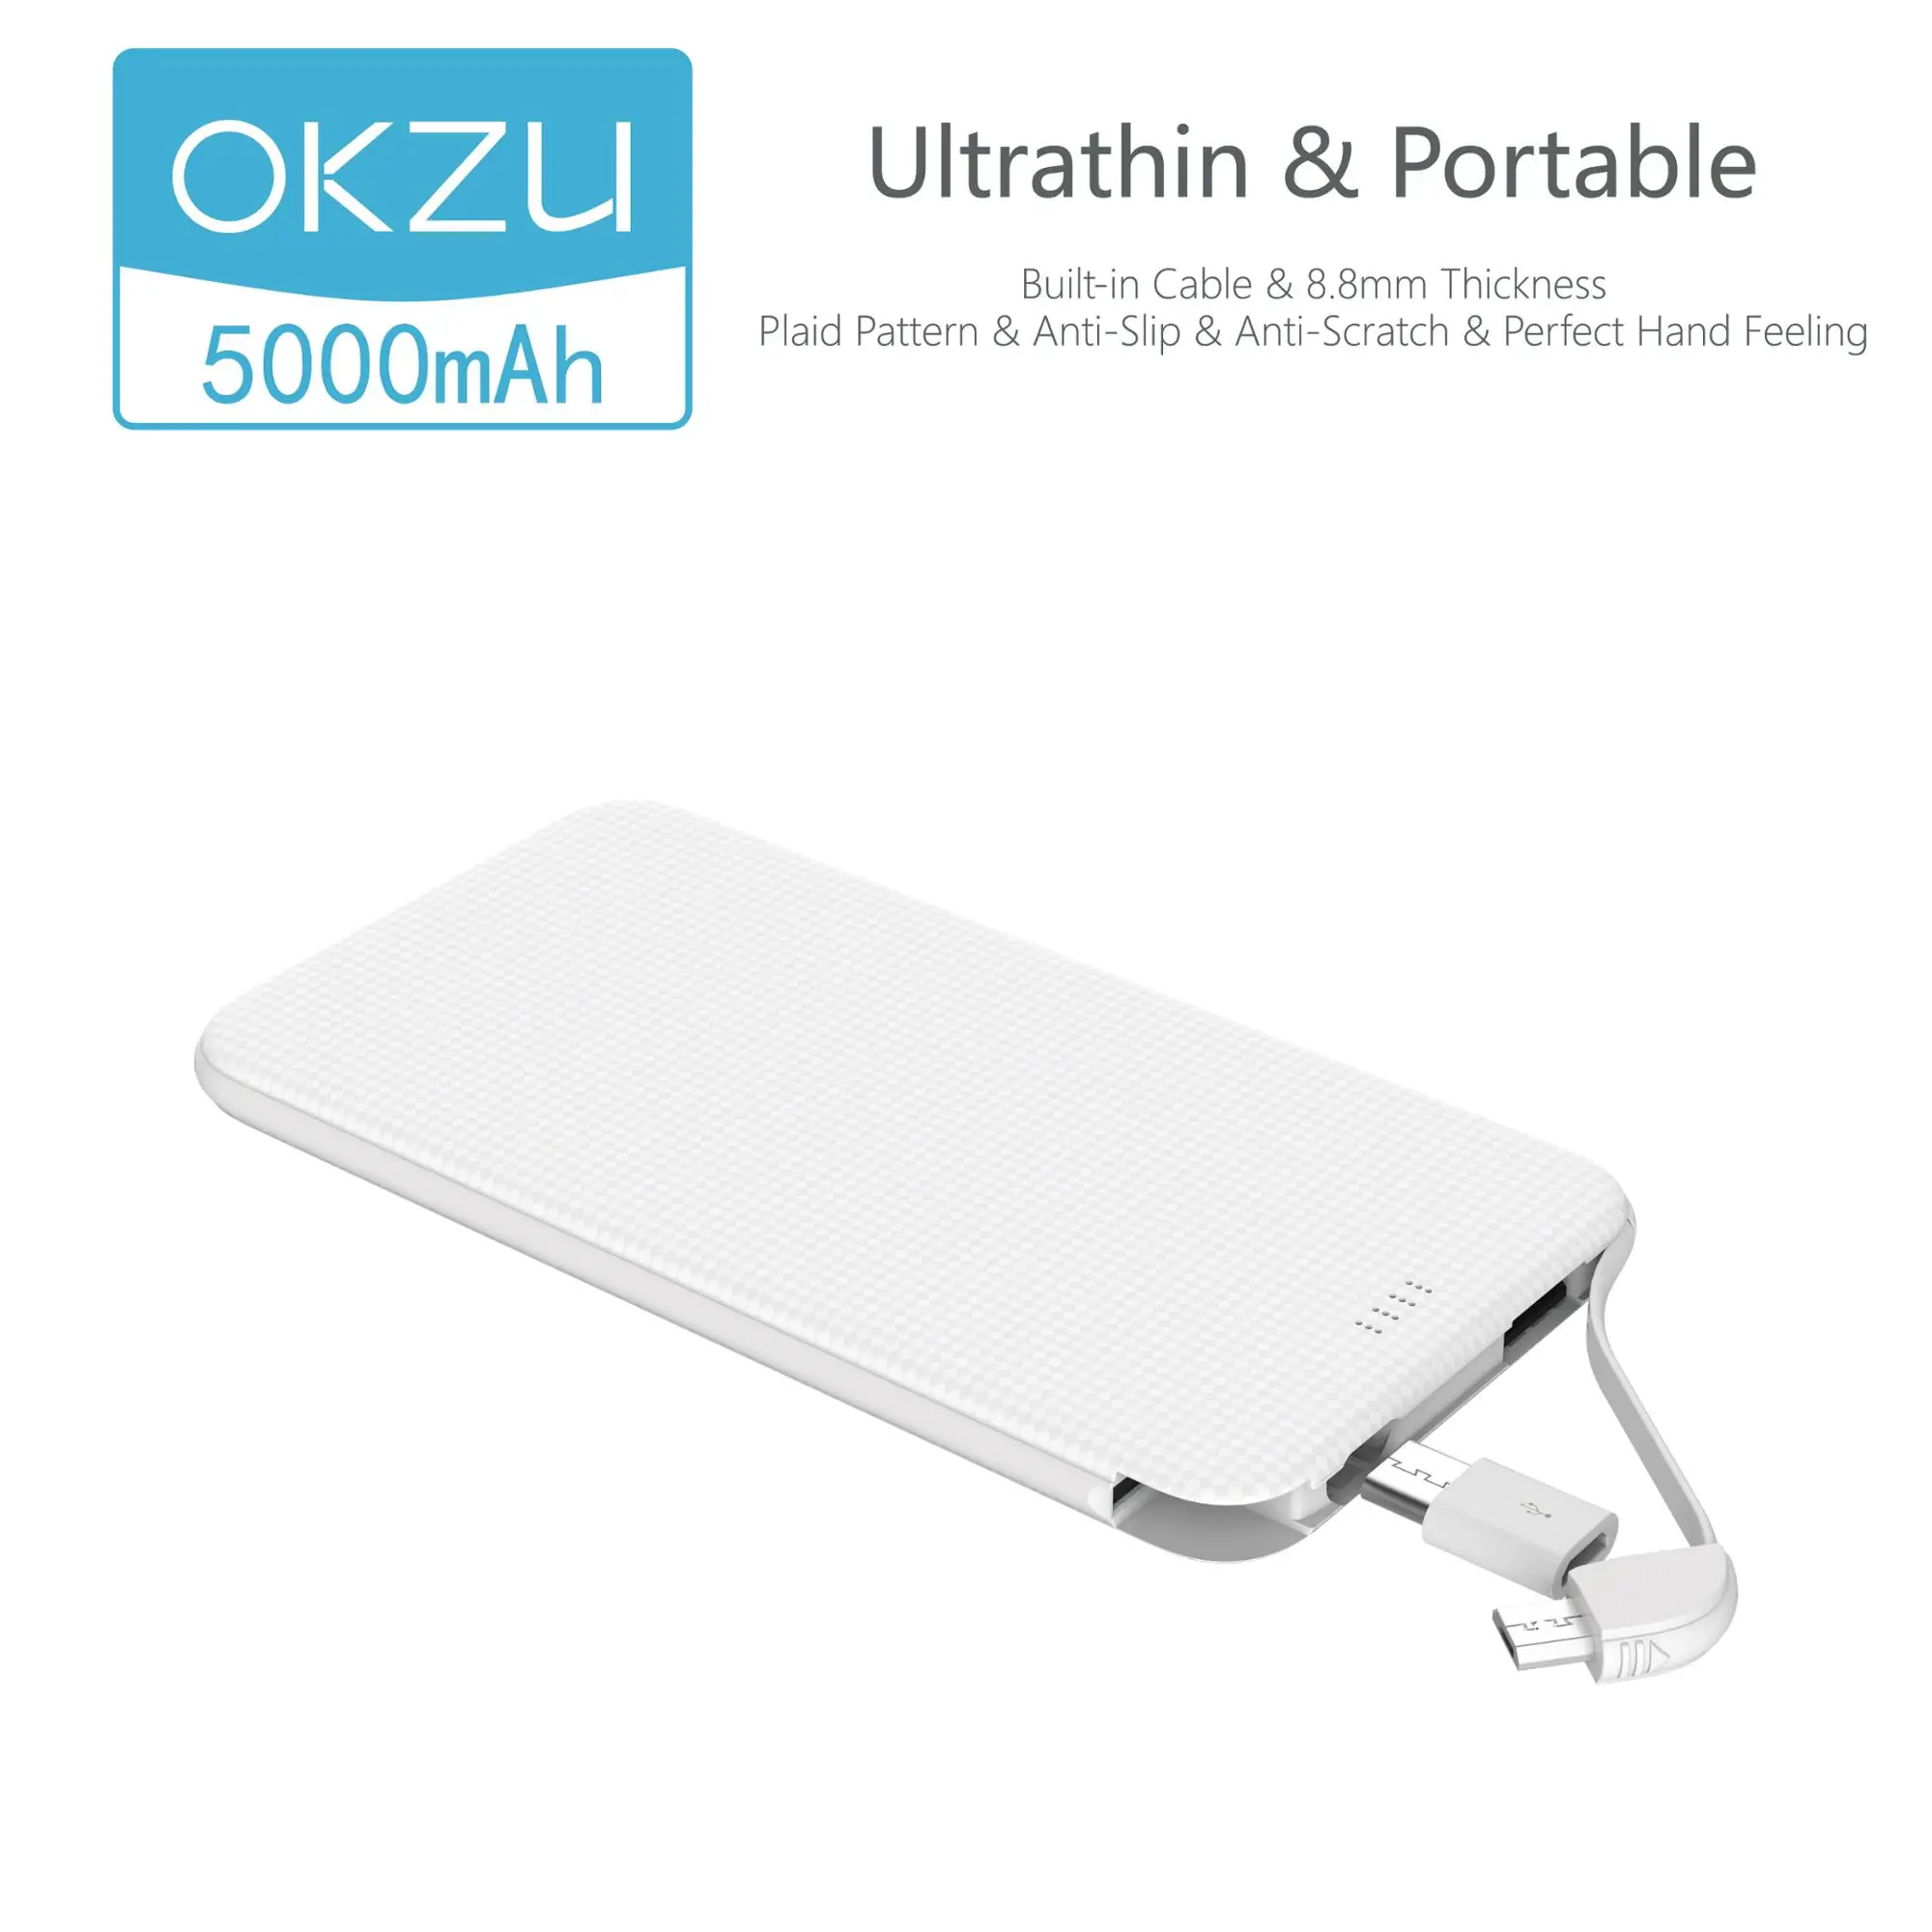 Factory Power Supplier Plain Rohs Power Bank 50mah With Ce Fc Rohs Buy Rohs Power Bank Plain Power Bank Power Bank Factory Power Bank 50mah Power Bank With Ce Fc Rohs Product On